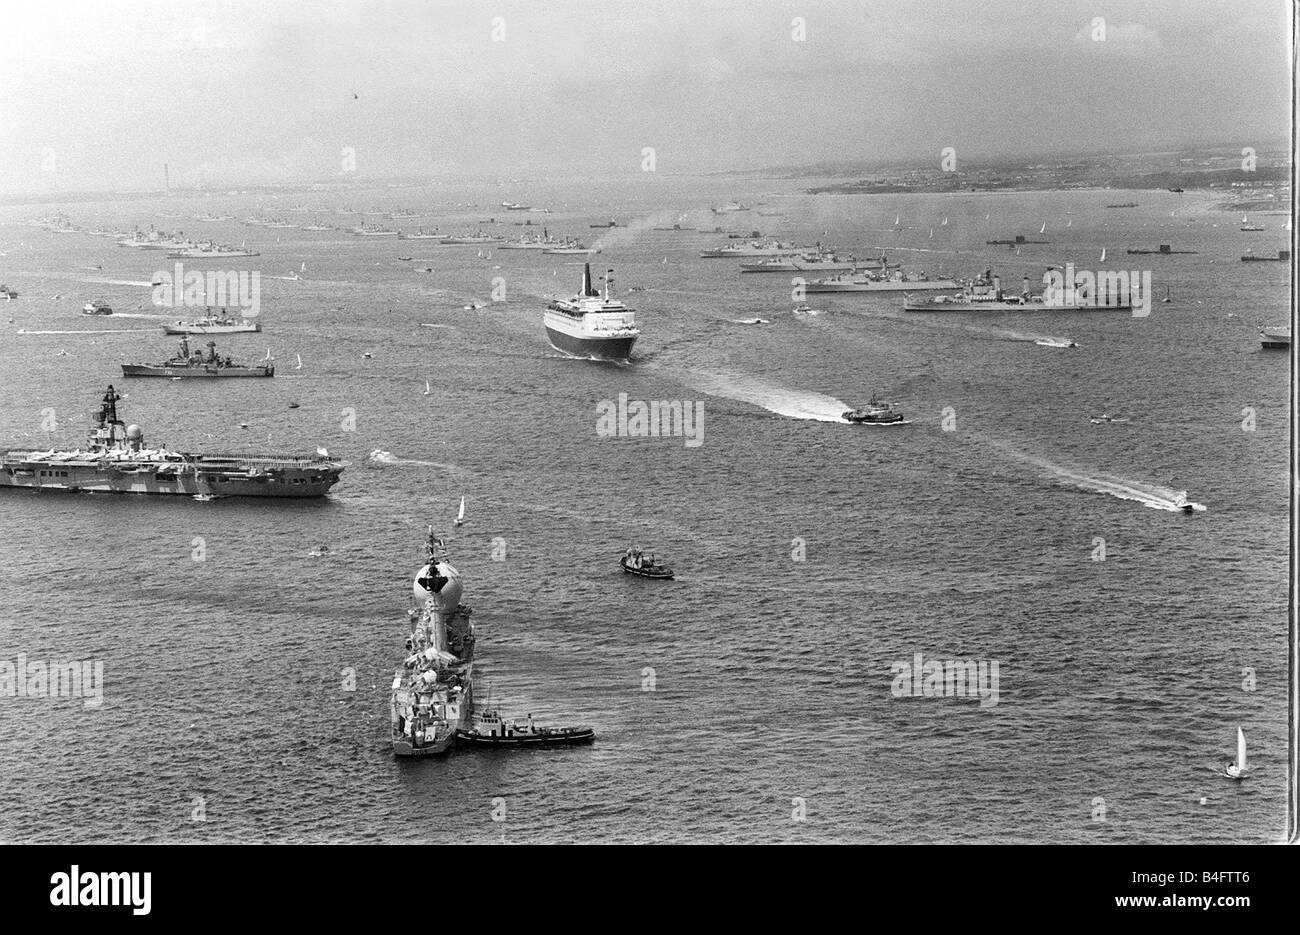 Queen Elizabeth II Silver Jubilee Navy Review June 1977 The Cunard Cruise Liner QE2 sailing throught the Silver Jubilee Naval Review fleet off Spithead in the Solent jubilee celebrations Stock Photo